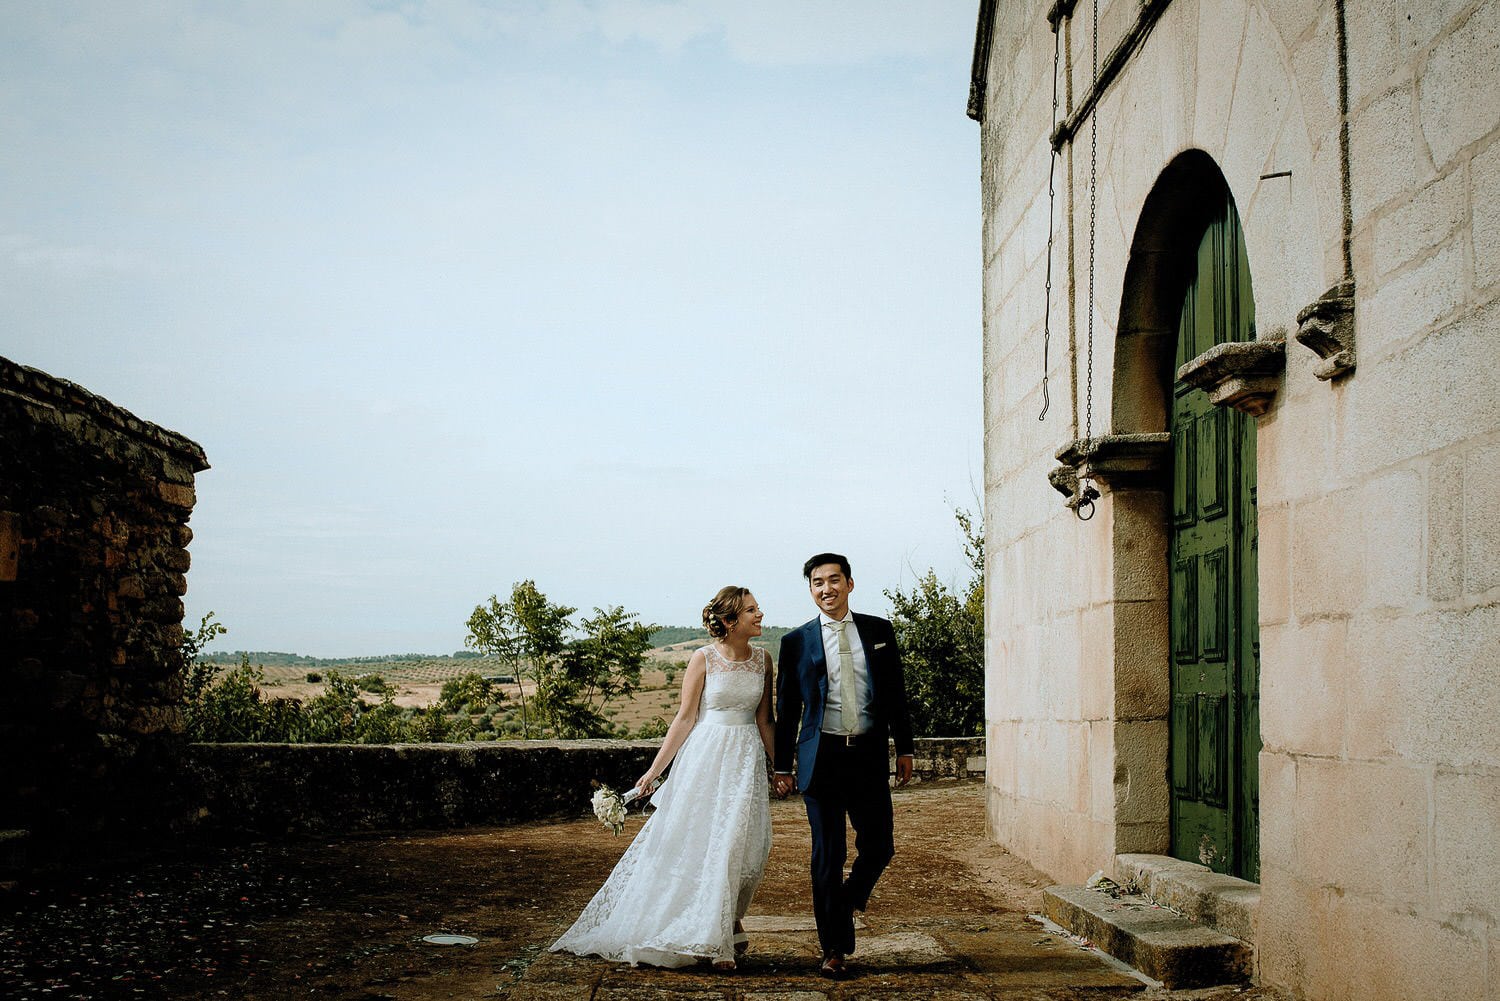 Charming Destination Wedding in the Portuguese Countryside - bride and groom in front of the small village church where they got married